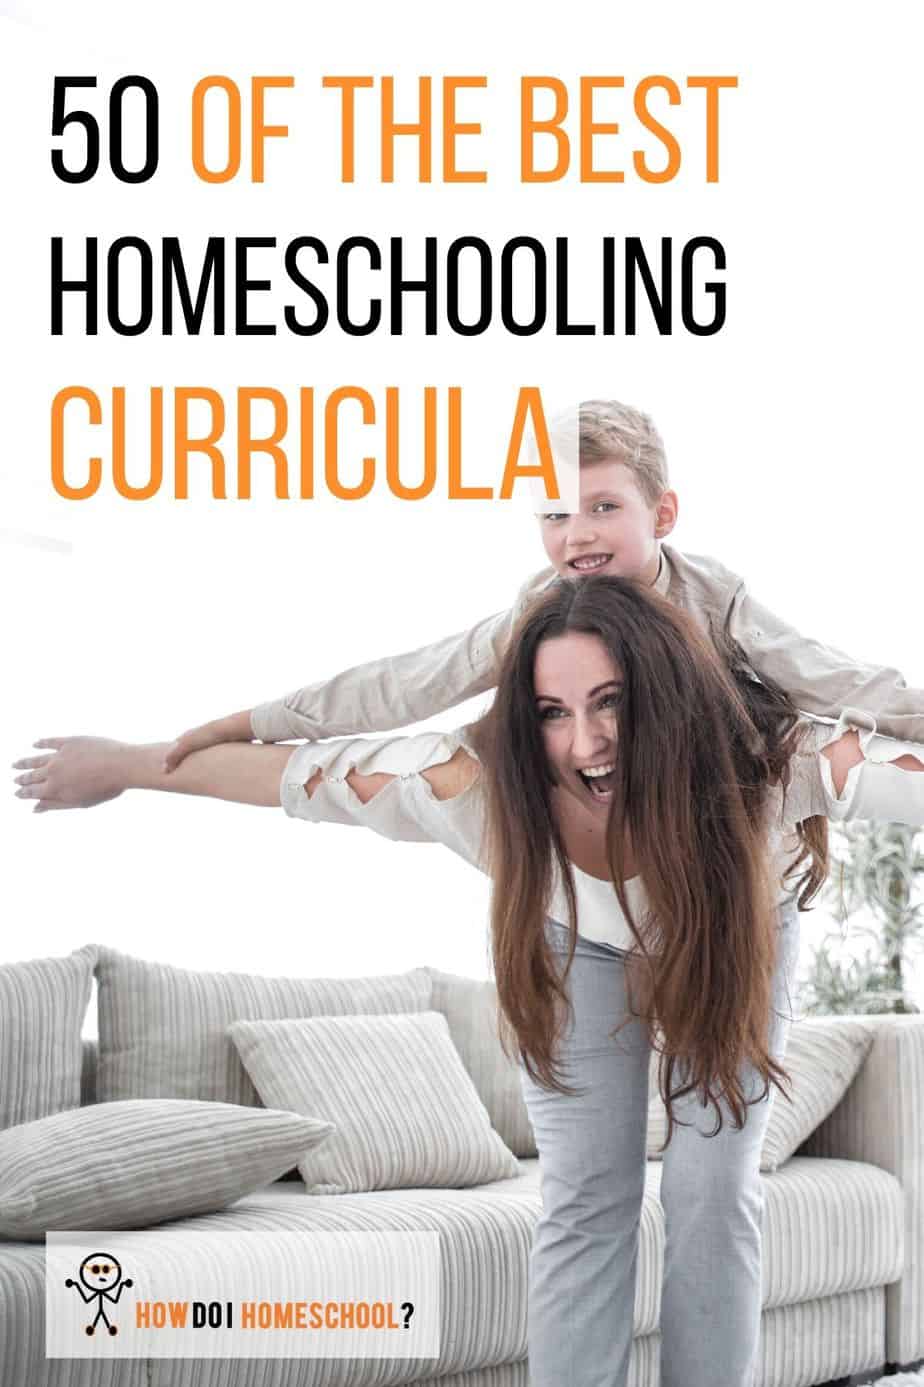 Check out 50 of the best homeschooling curriculum programs available today. We look at Switched on Schoolhouse, Time 4 Learning, The Good and the Beautiful and more. #besthomeschoolingcurriculum #tophomeschoolingcurriculum